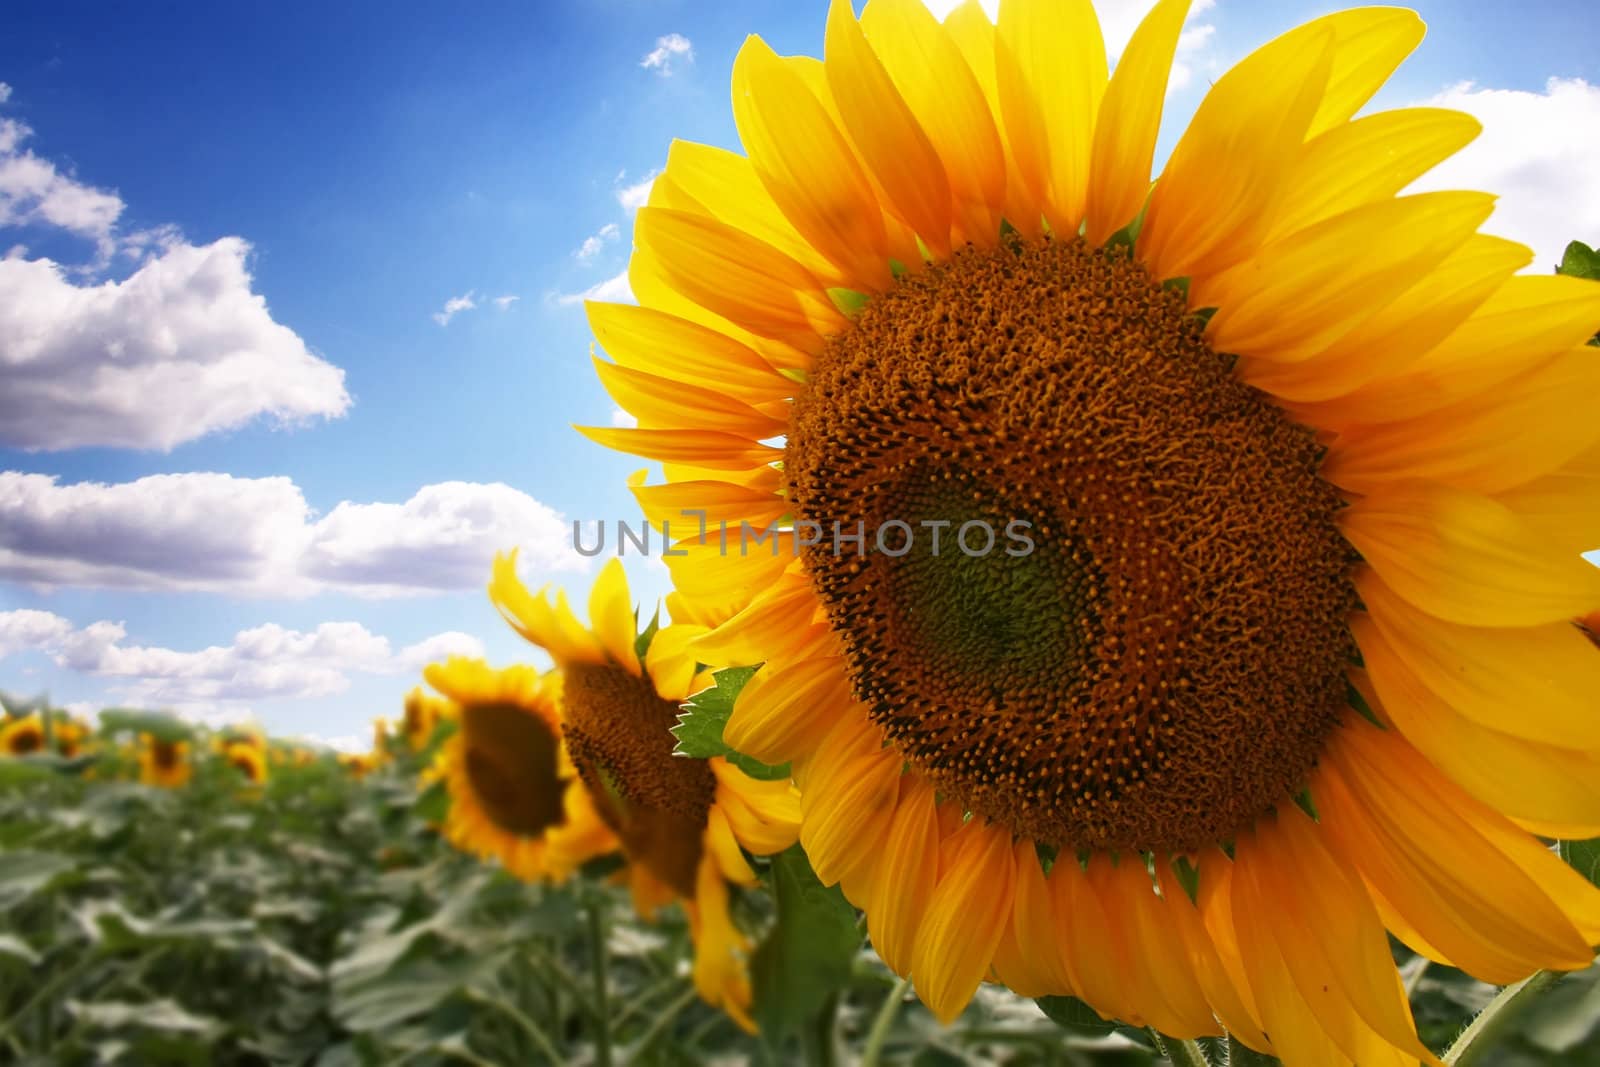 Sunflower with blue sky on the background